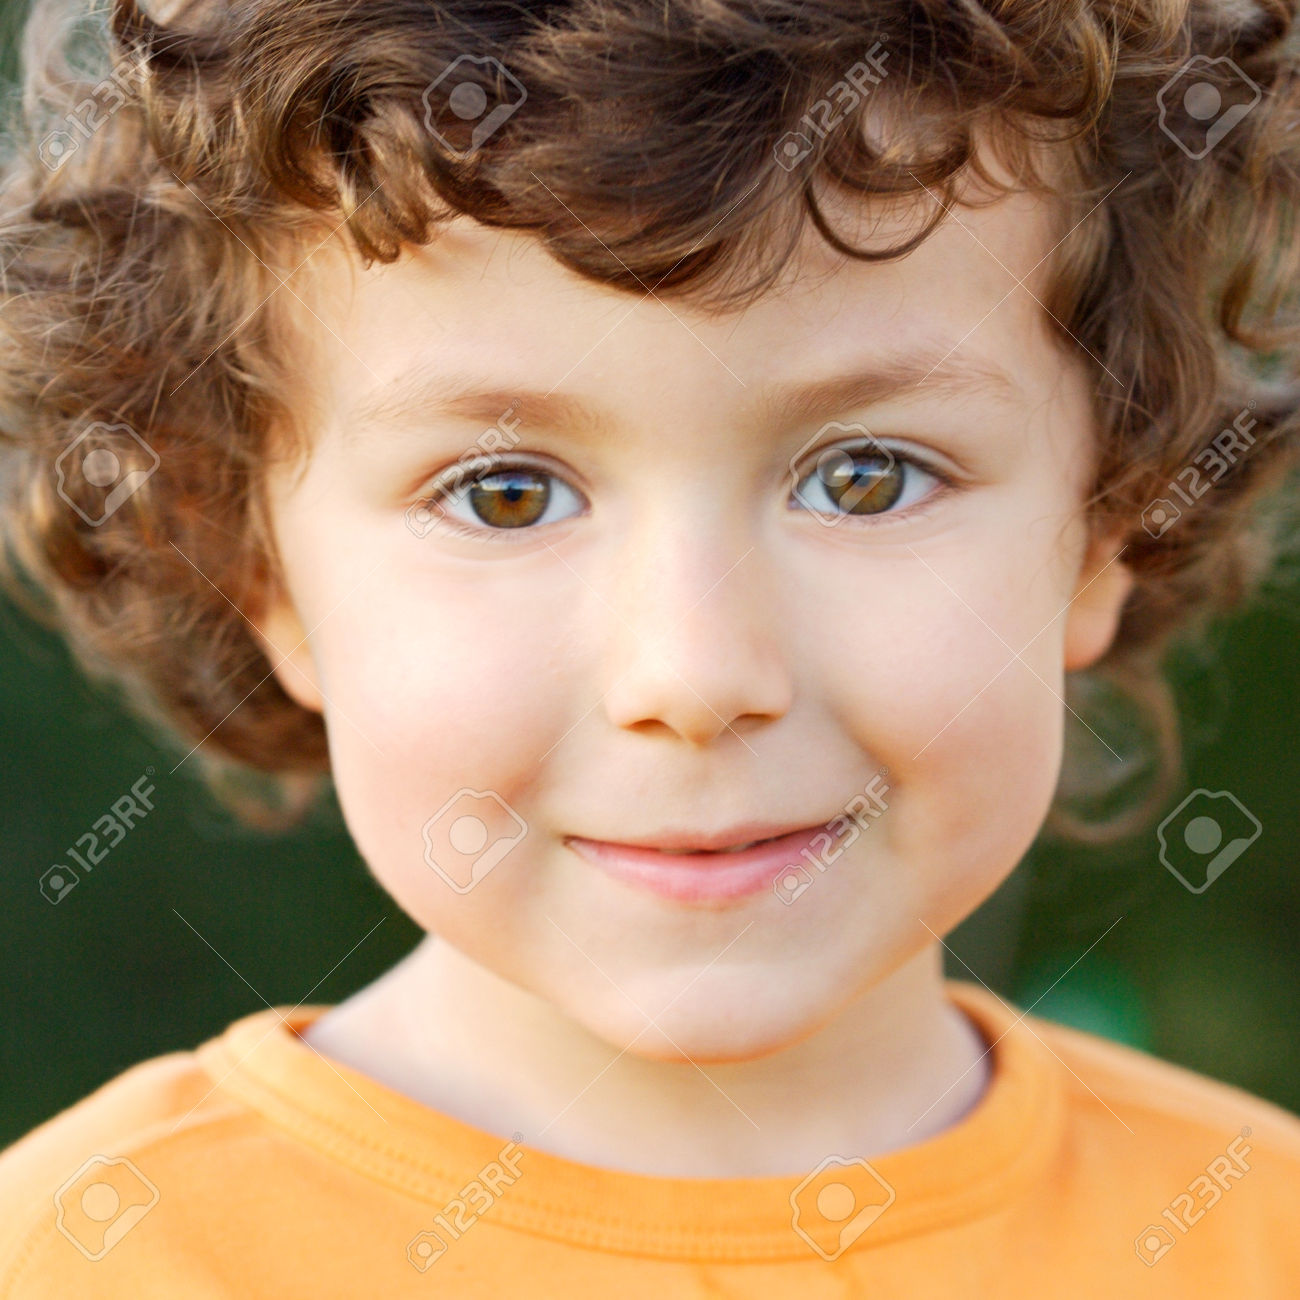 46800490 Nice portrait of a little boy with curly hair and brown eyes Stock Photo